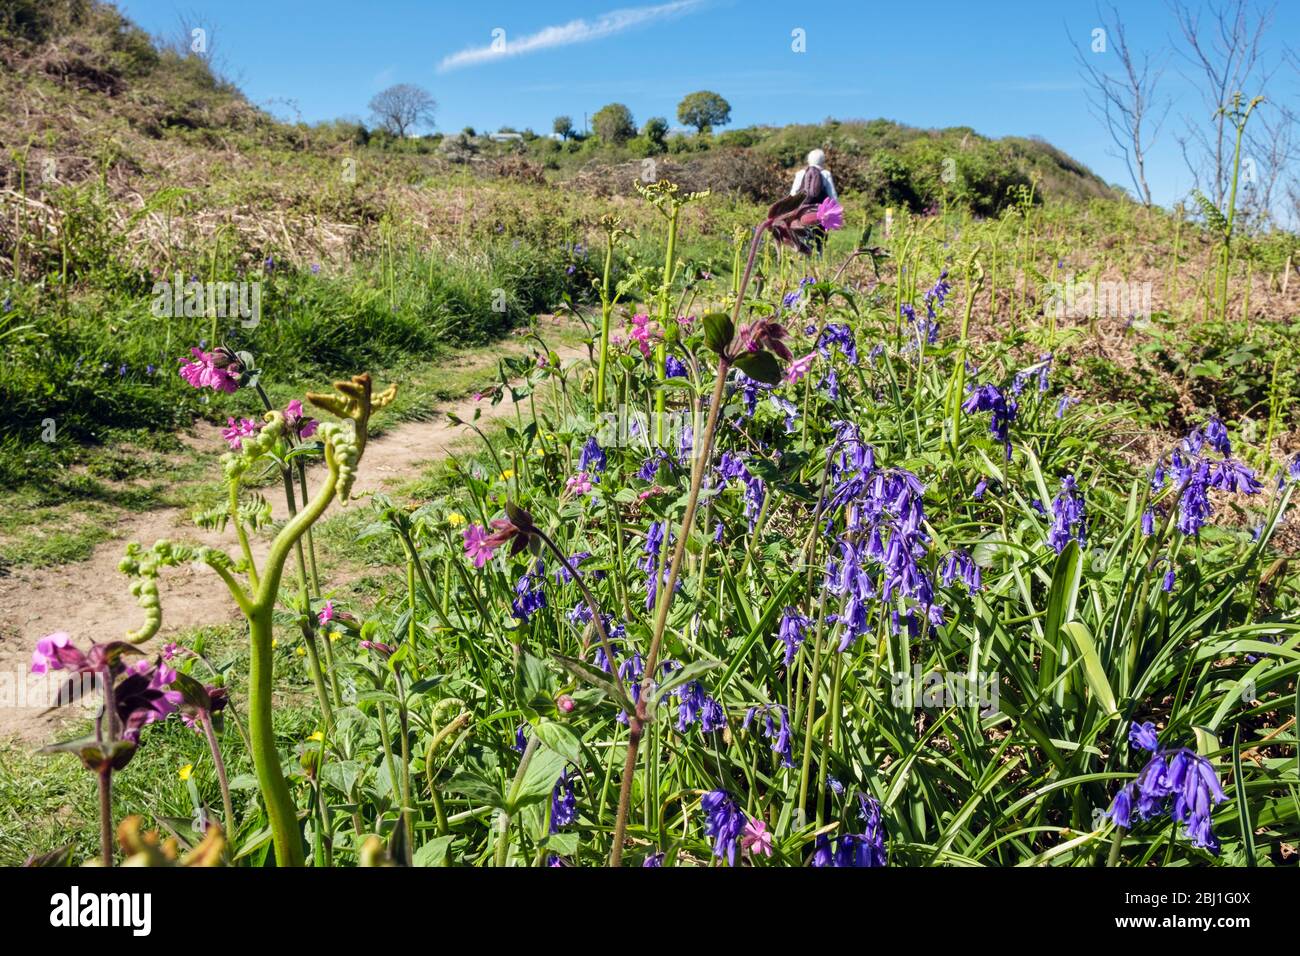 Bluebells growing in countryside along Coastal Footpath with a walker walking in spring. Benllech, Isle of Anglesey, north Wales, UK, Britain Stock Photo